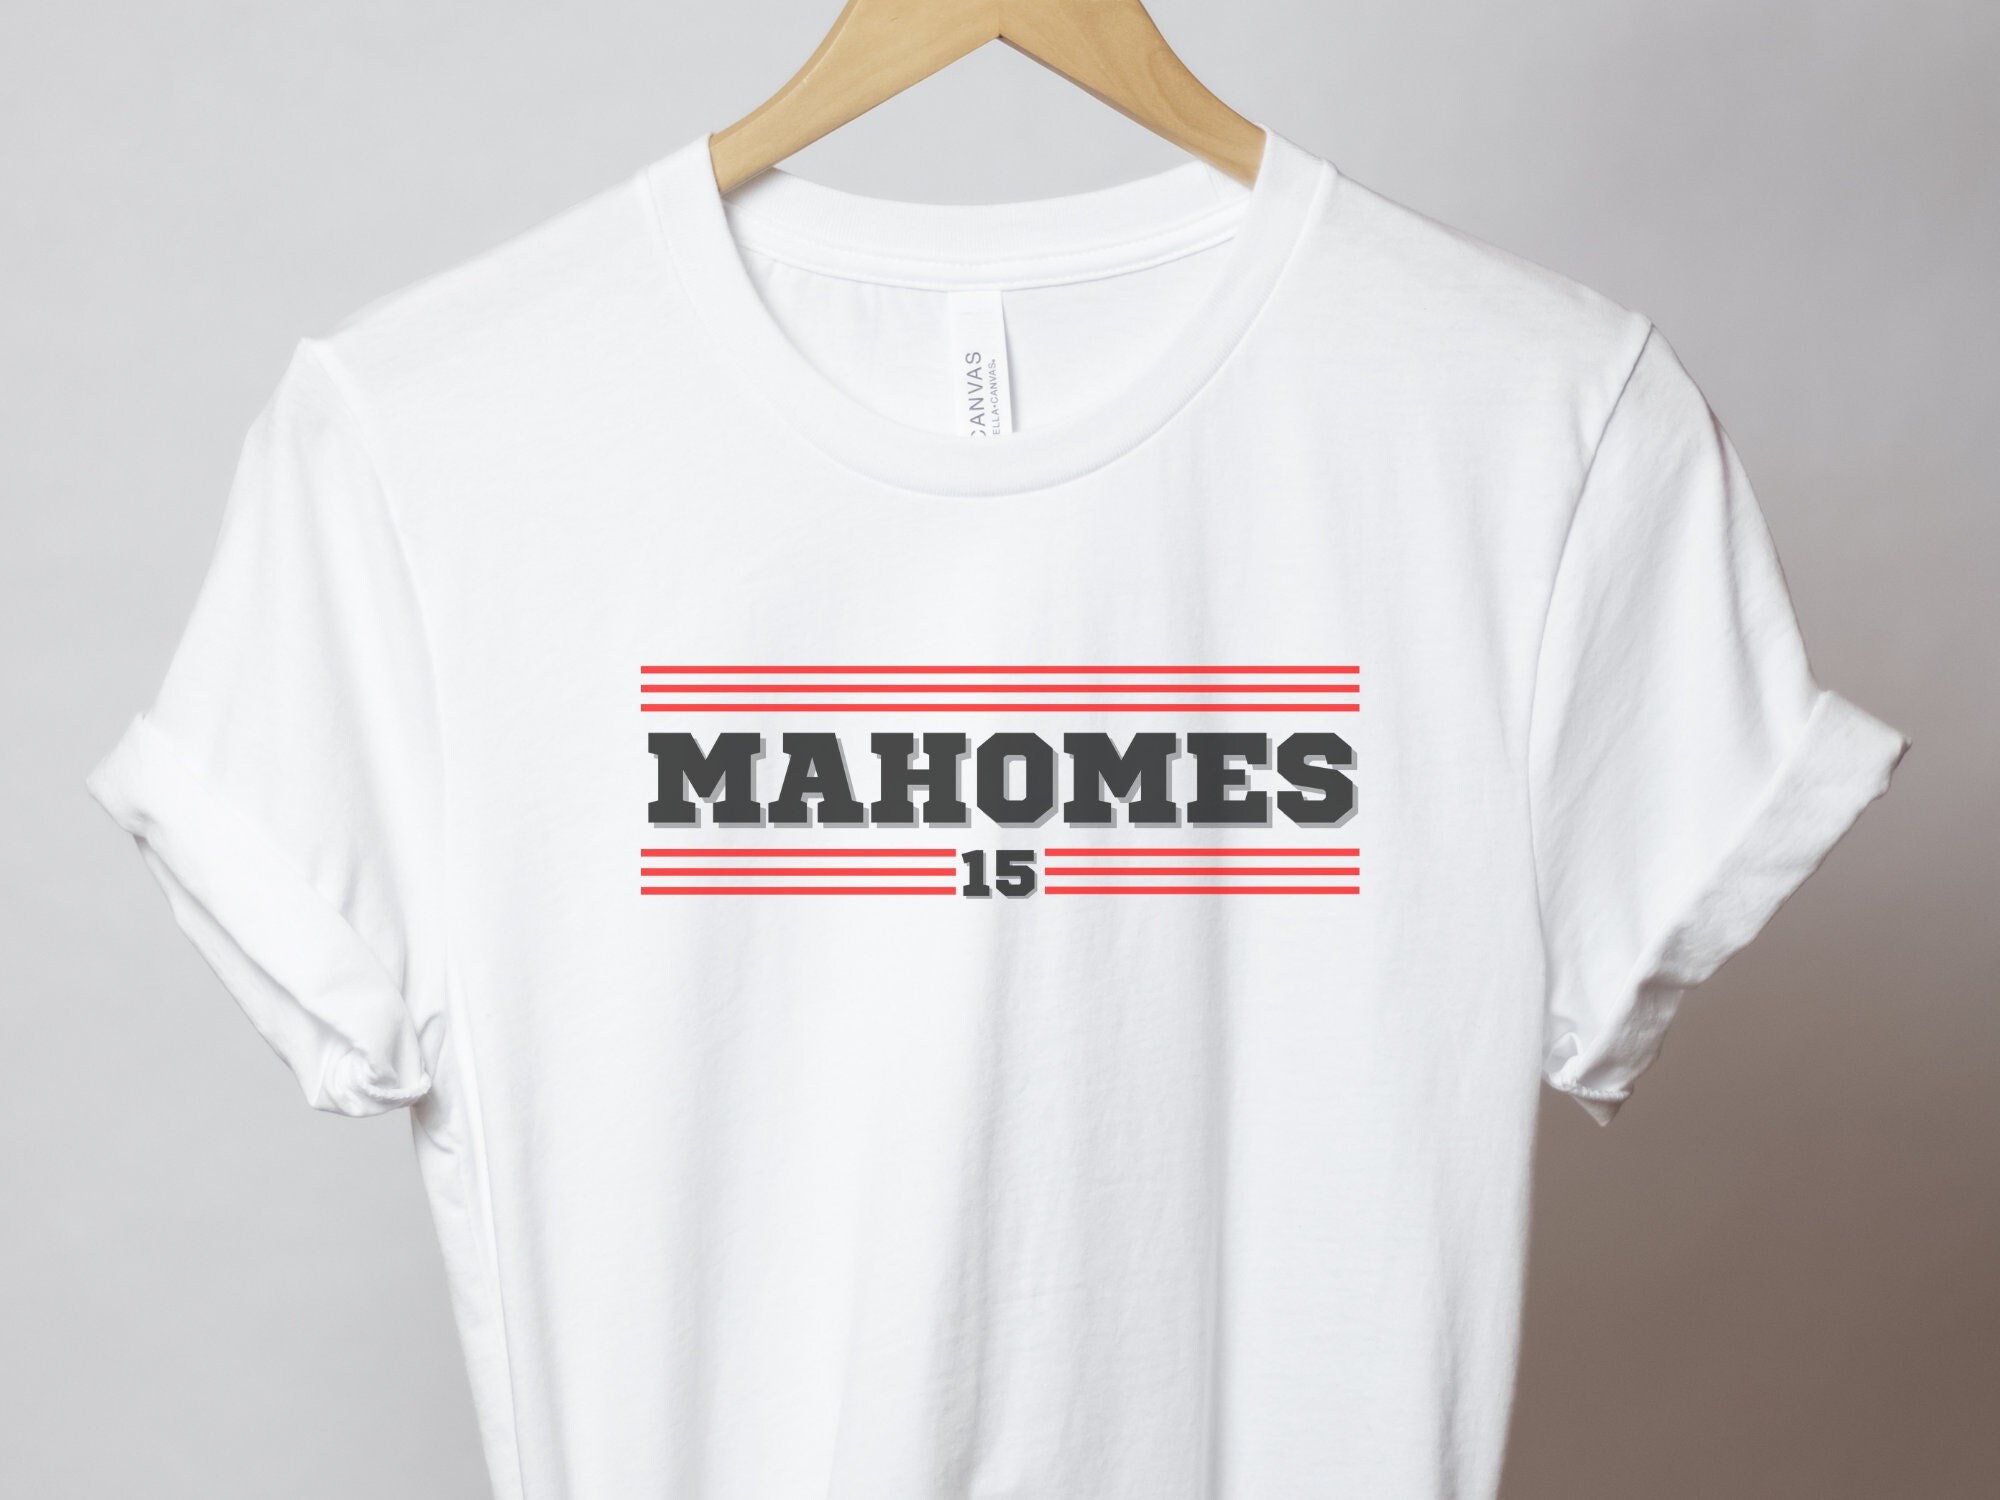 Wishful Inking Sundays are for Chillin' with Mahomies Football Fans Distressed Vintage Style Classic Adult T-Shirt 